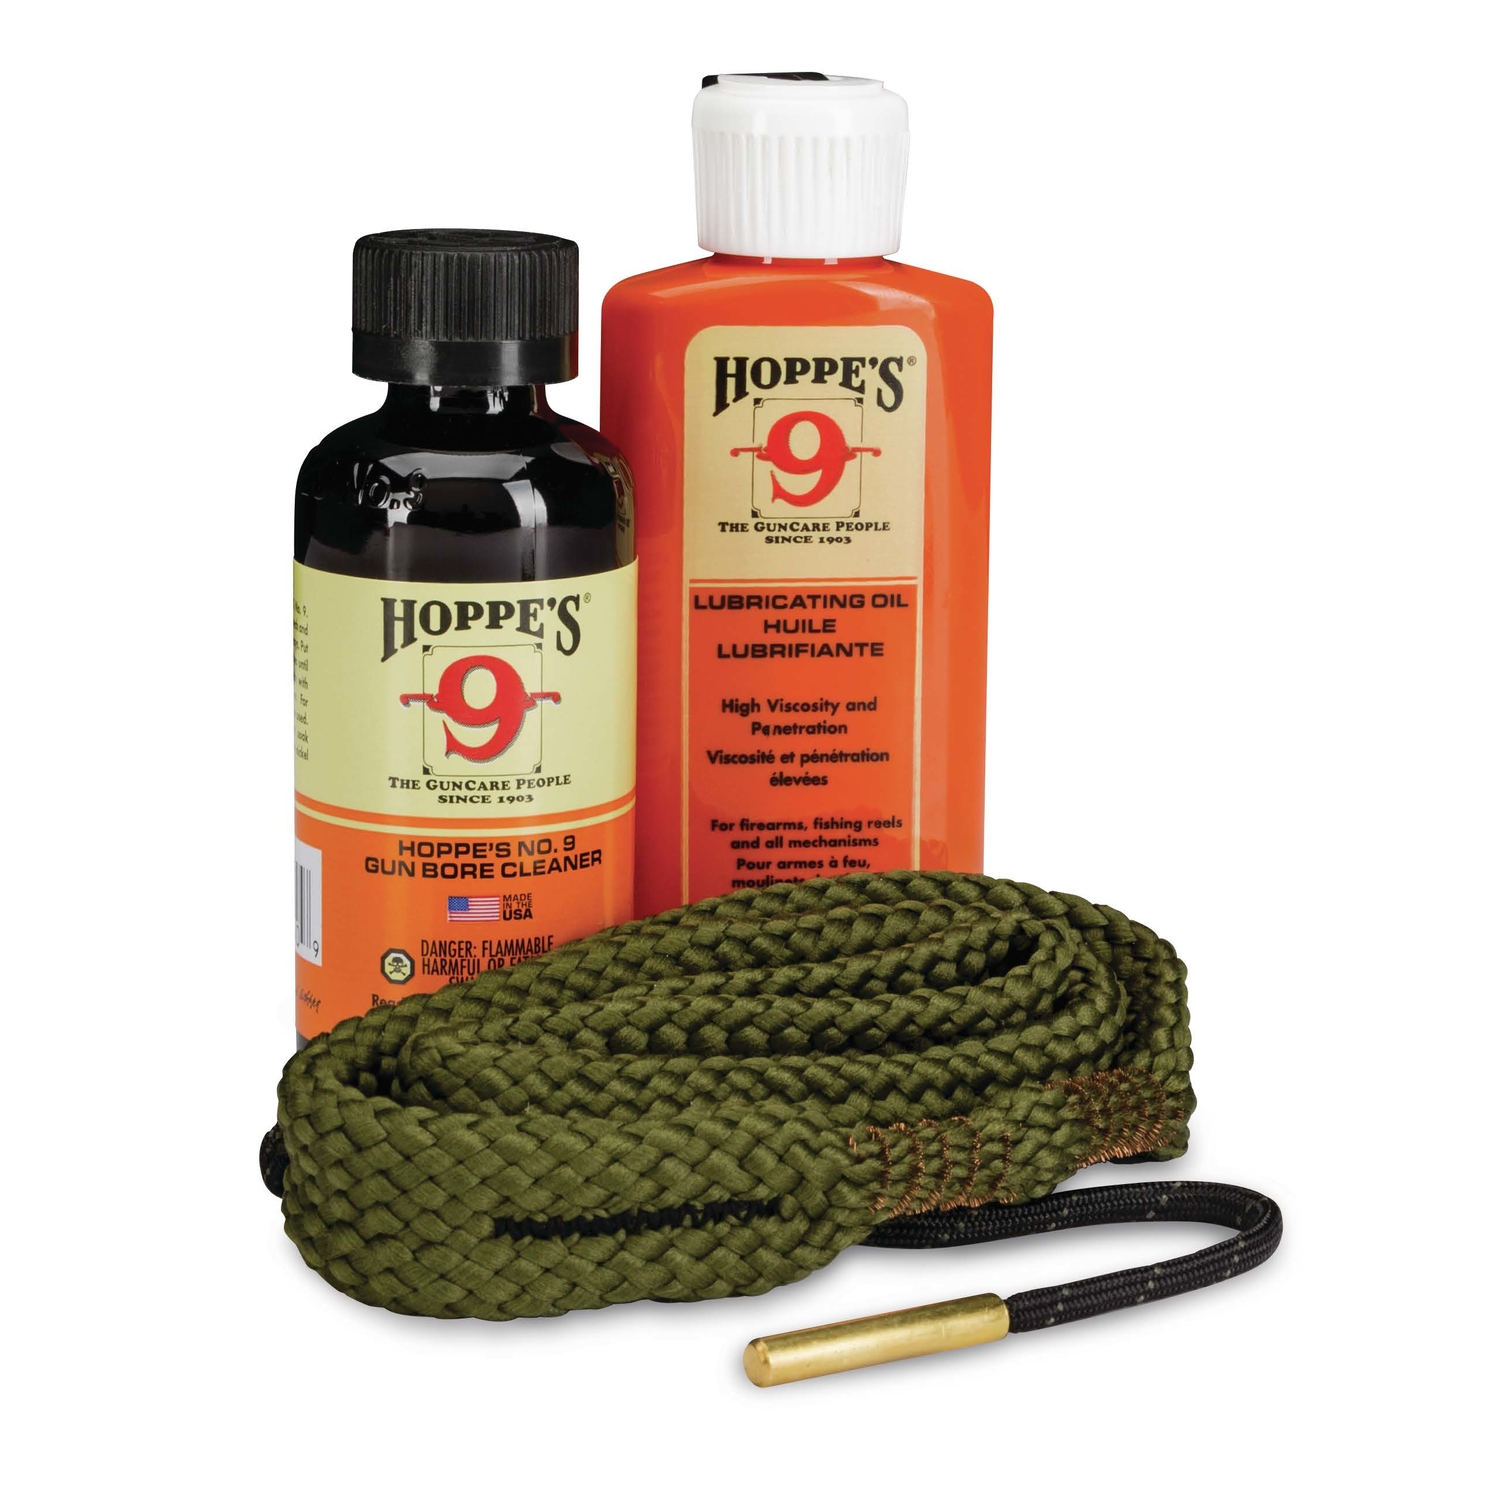 Photos - Other sporting goods Hoppes Hoppe's No. 9 Pistol Gun Cleaning Kit 3 pc 110009 